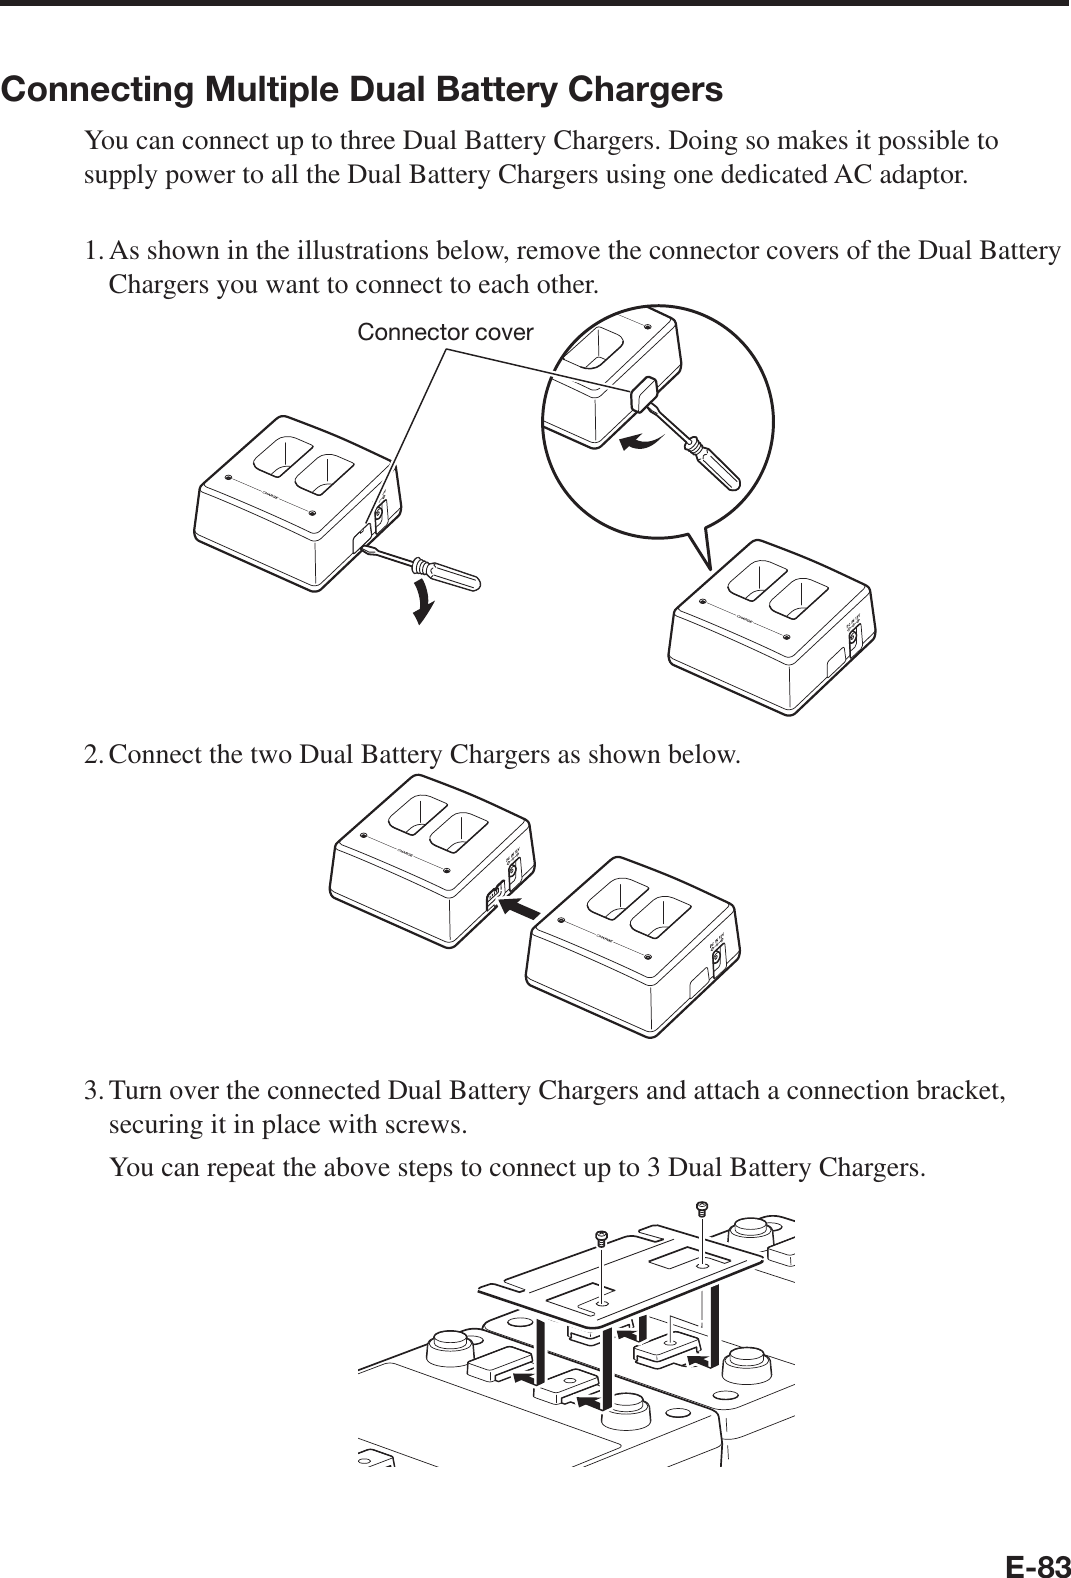 E-83Connecting Multiple Dual Battery ChargersYou can connect up to three Dual Battery Chargers. Doing so makes it possible to supply power to all the Dual Battery Chargers using one dedicated AC adaptor.1. As shown in the illustrations below, remove the connector covers of the Dual Battery Chargers you want to connect to each other.Connector cover2. Connect the two Dual Battery Chargers as shown below.3. Turn over the connected Dual Battery Chargers and attach a connection bracket, securing it in place with screws.  You can repeat the above steps to connect up to 3 Dual Battery Chargers.